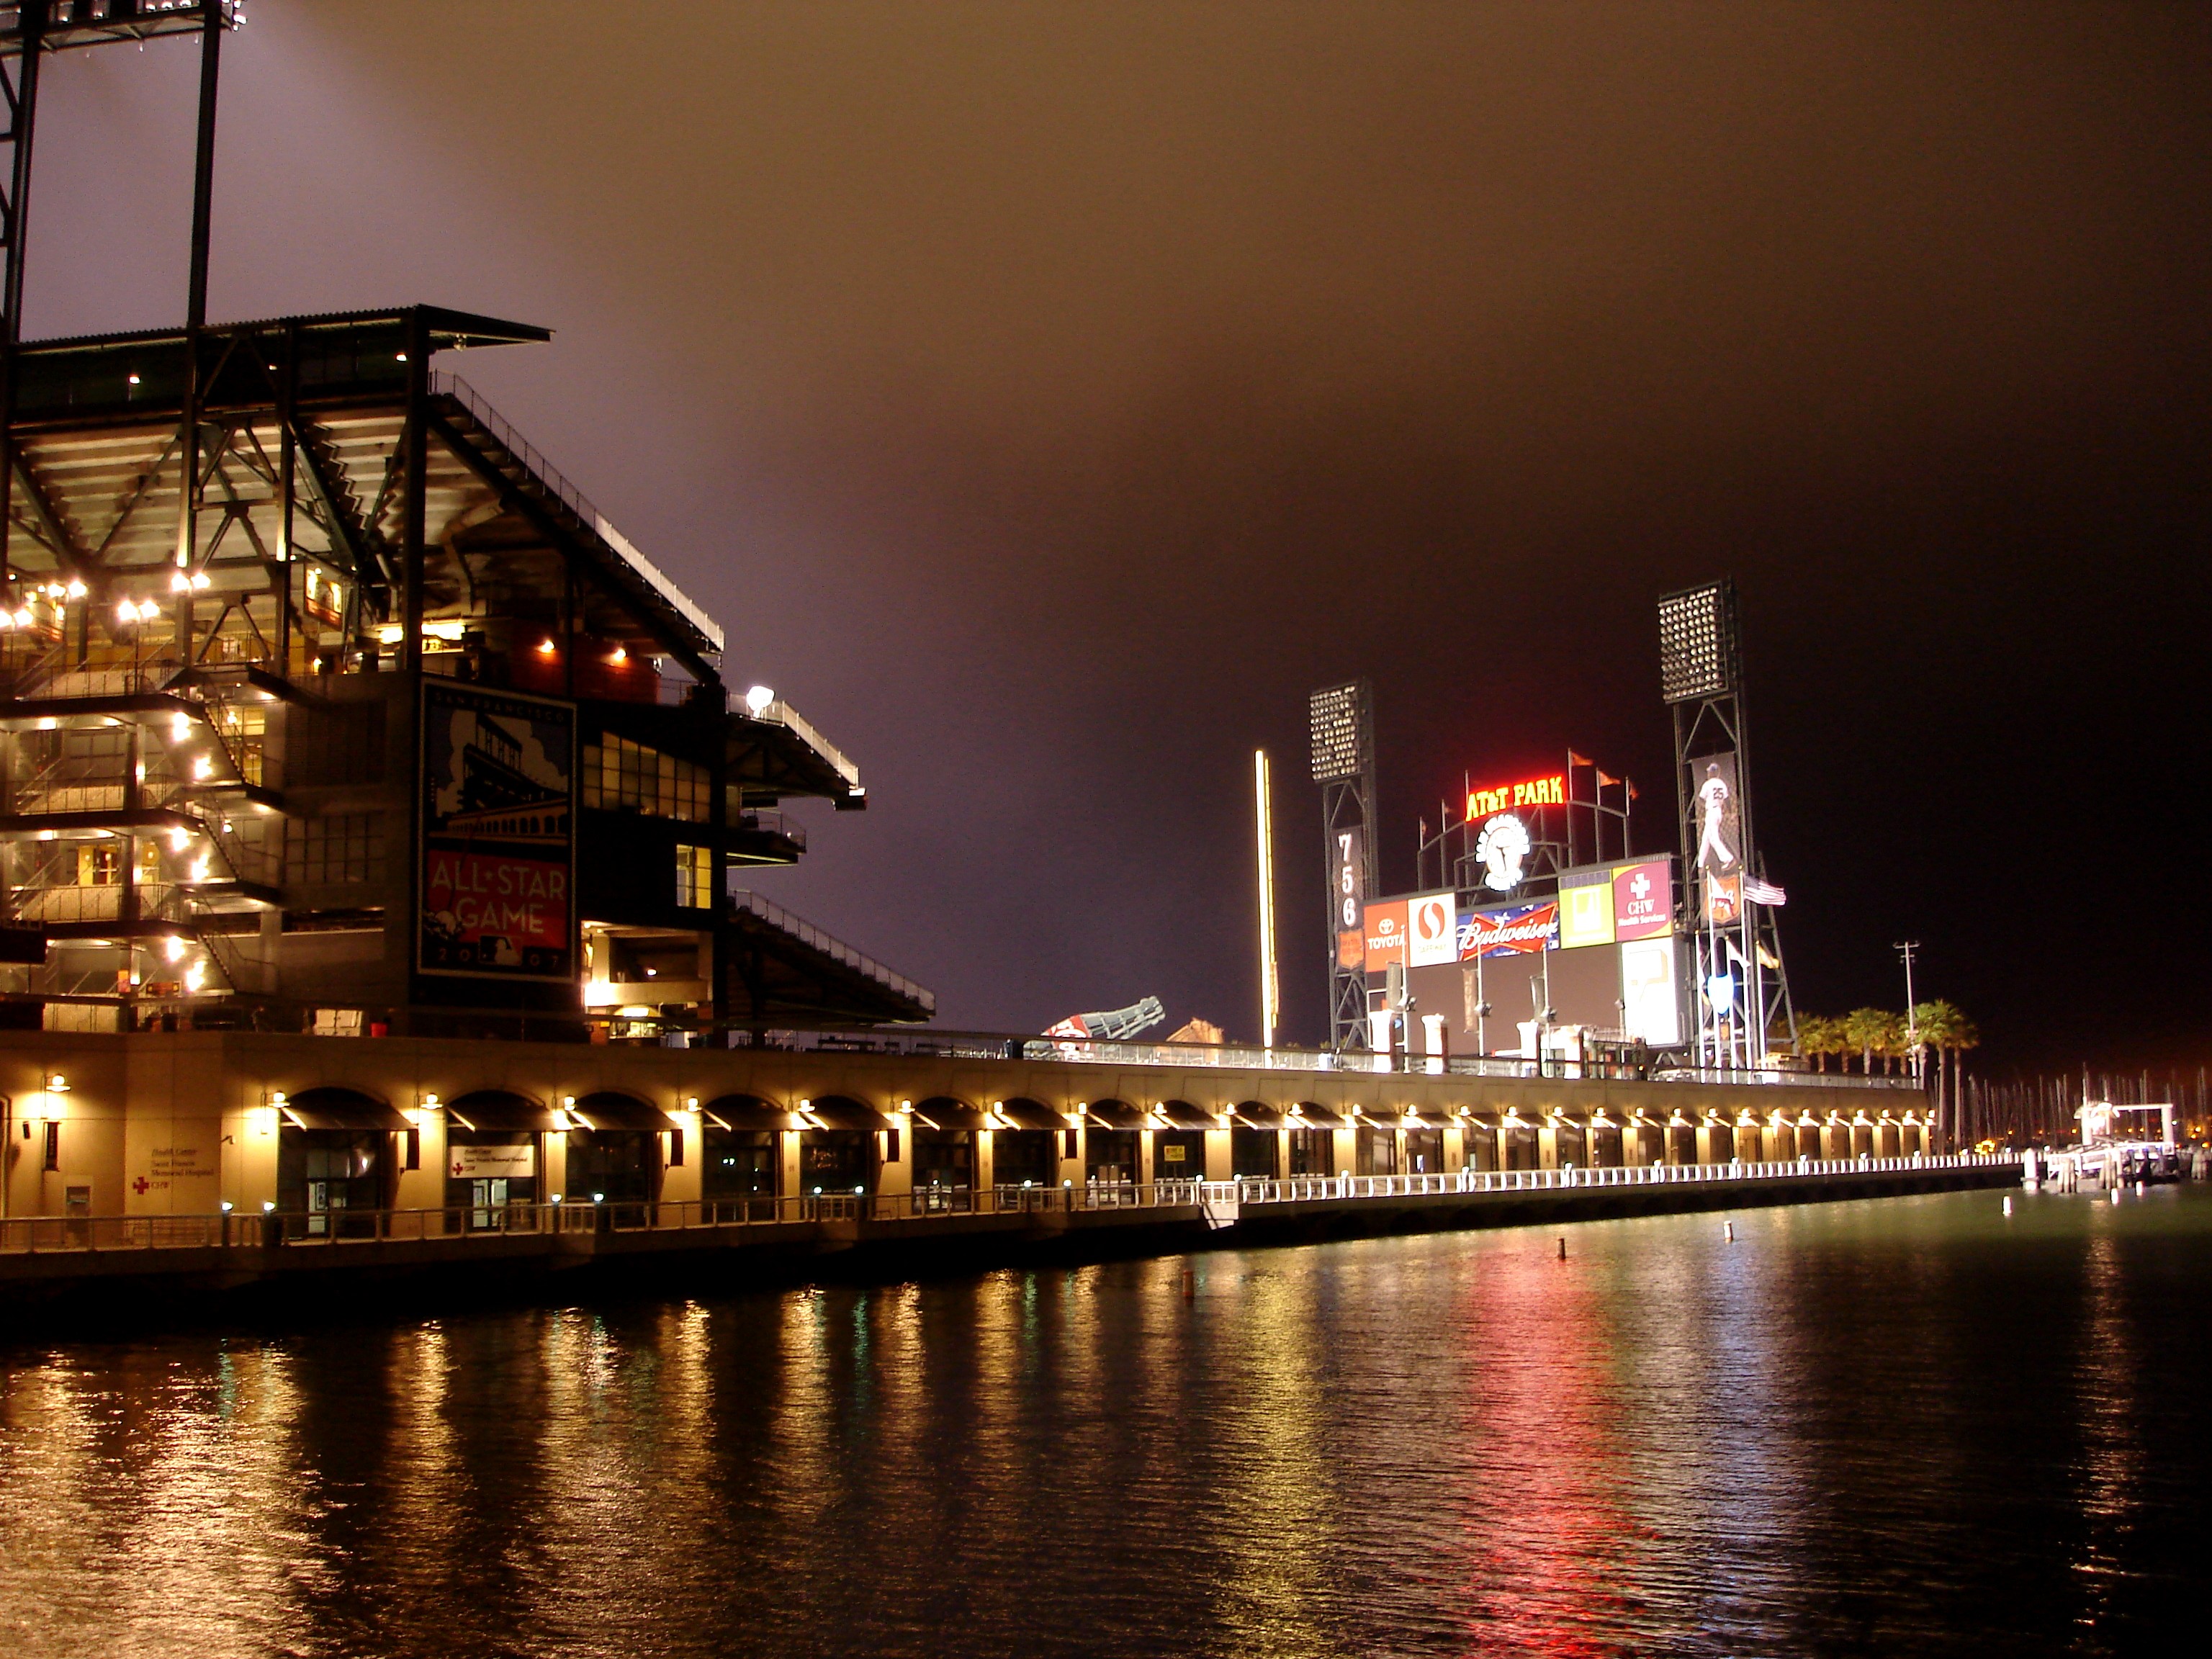 ATT Park At Night something for the eyes the photography of